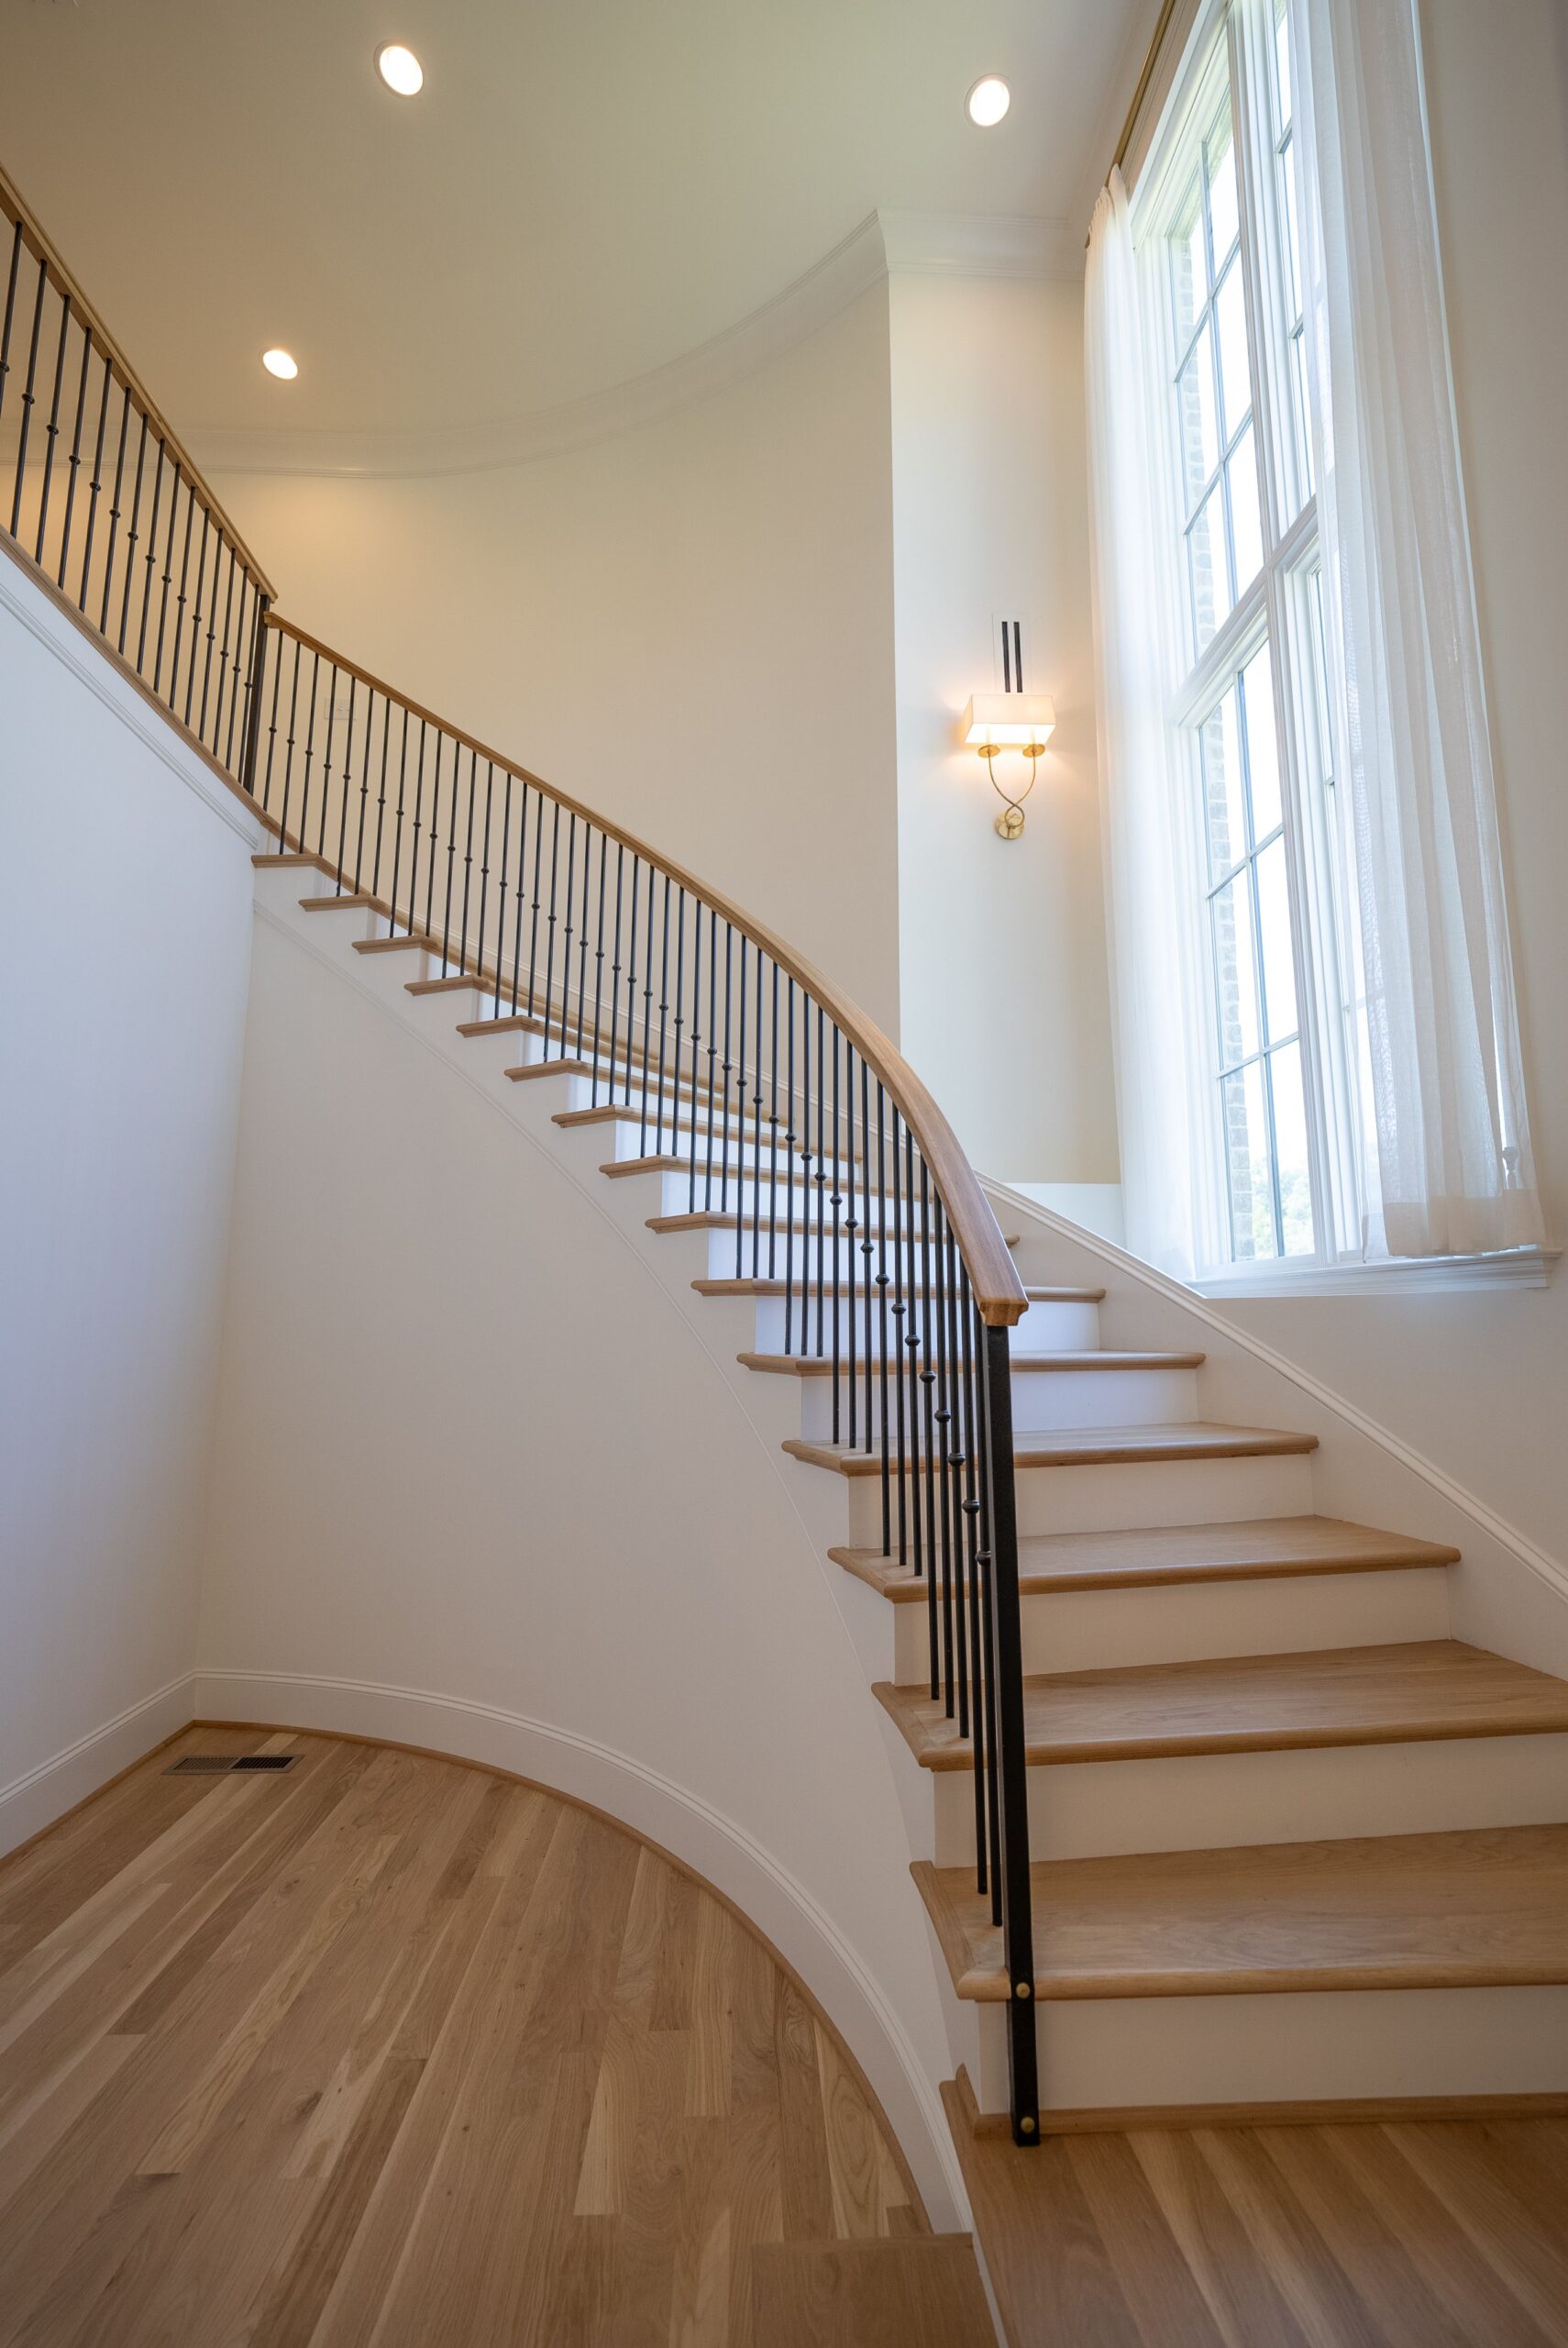 A staircase with white walls and wooden floors.